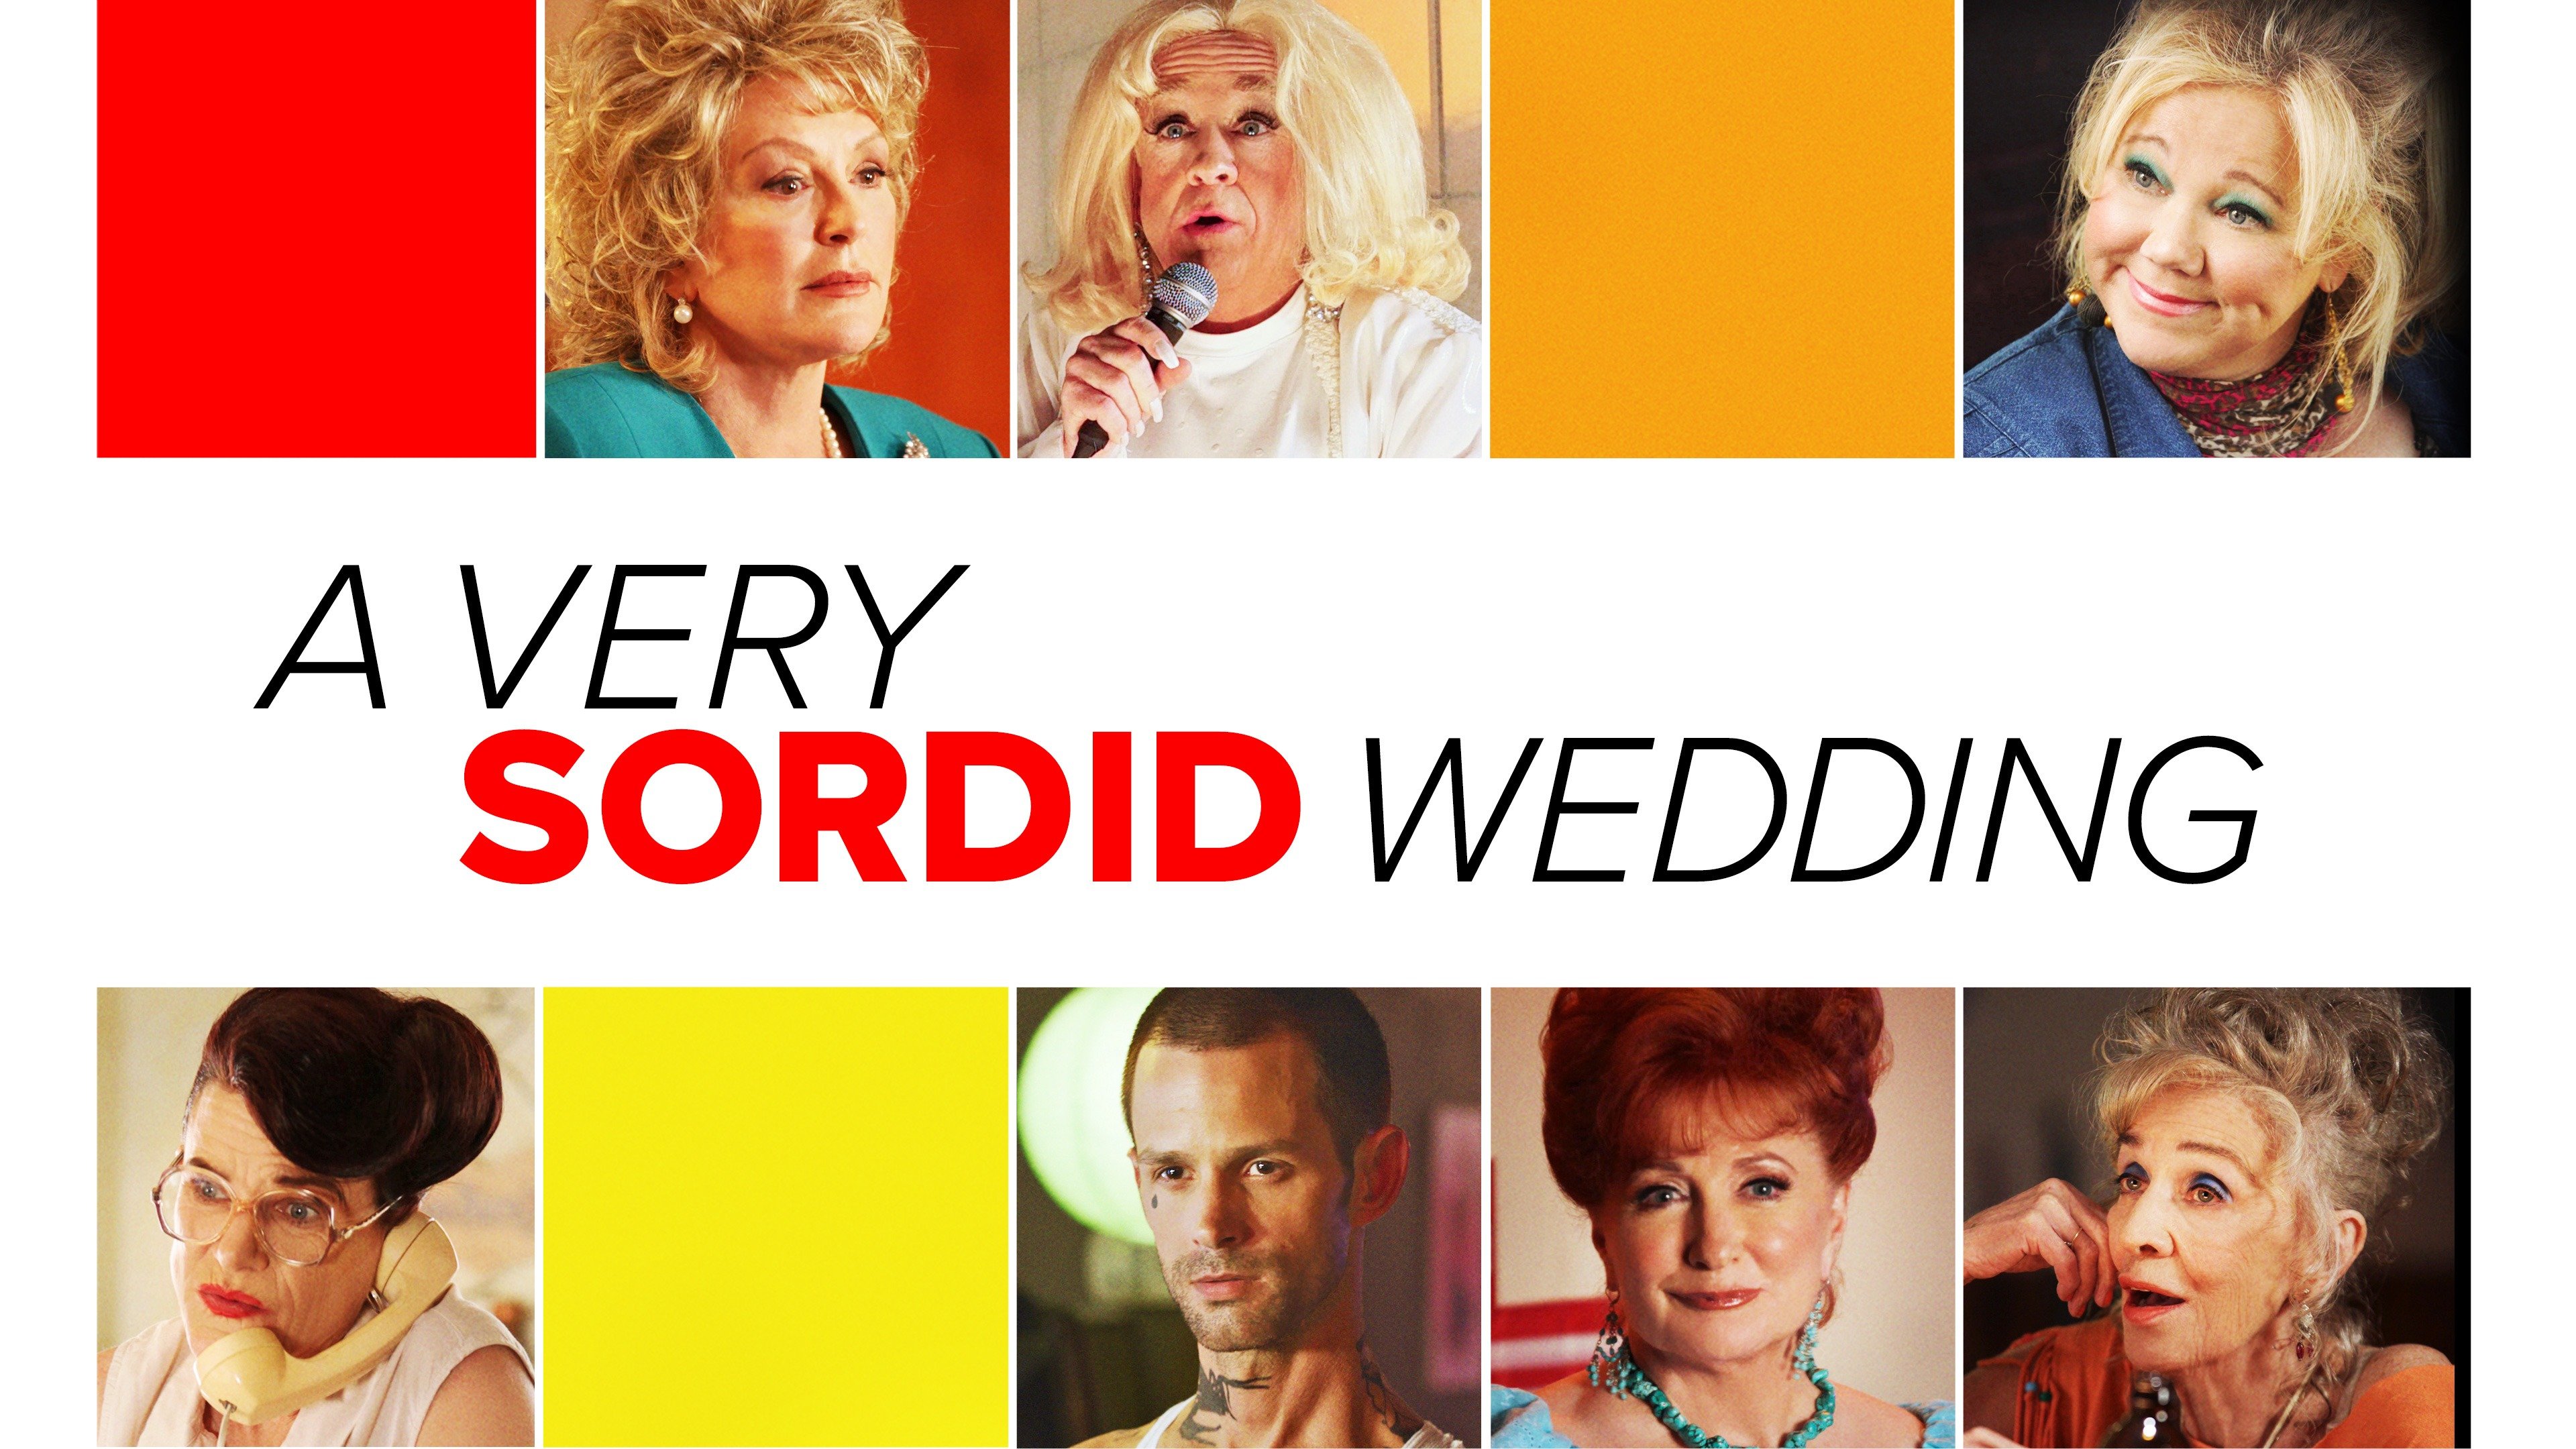 A Very Sordid Wedding Trailer 1 Trailers & Videos Rotten Tomatoes